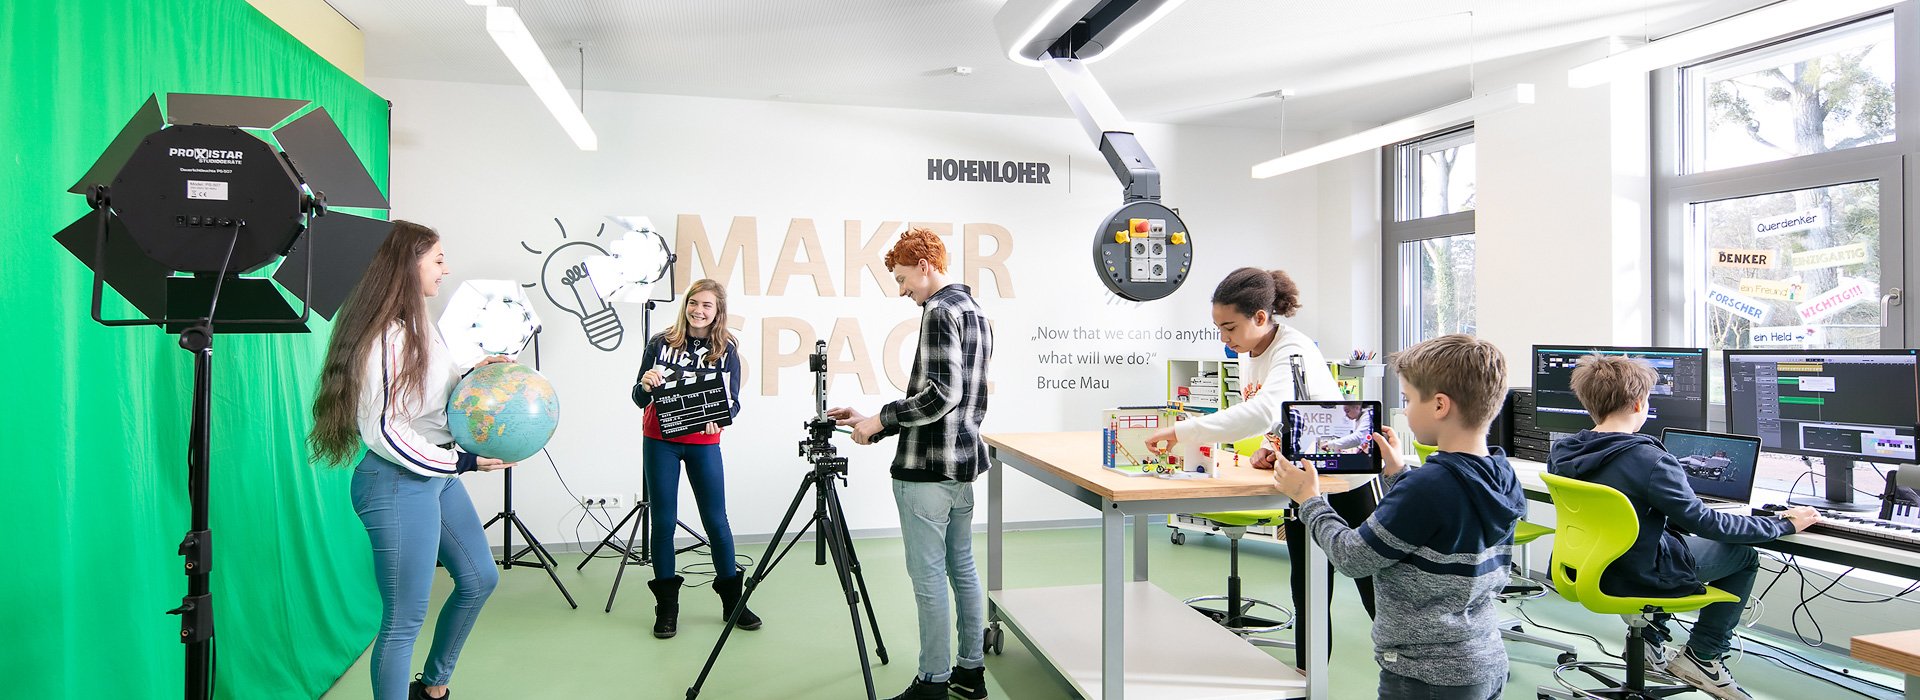 Image: Video Production at Makerspace